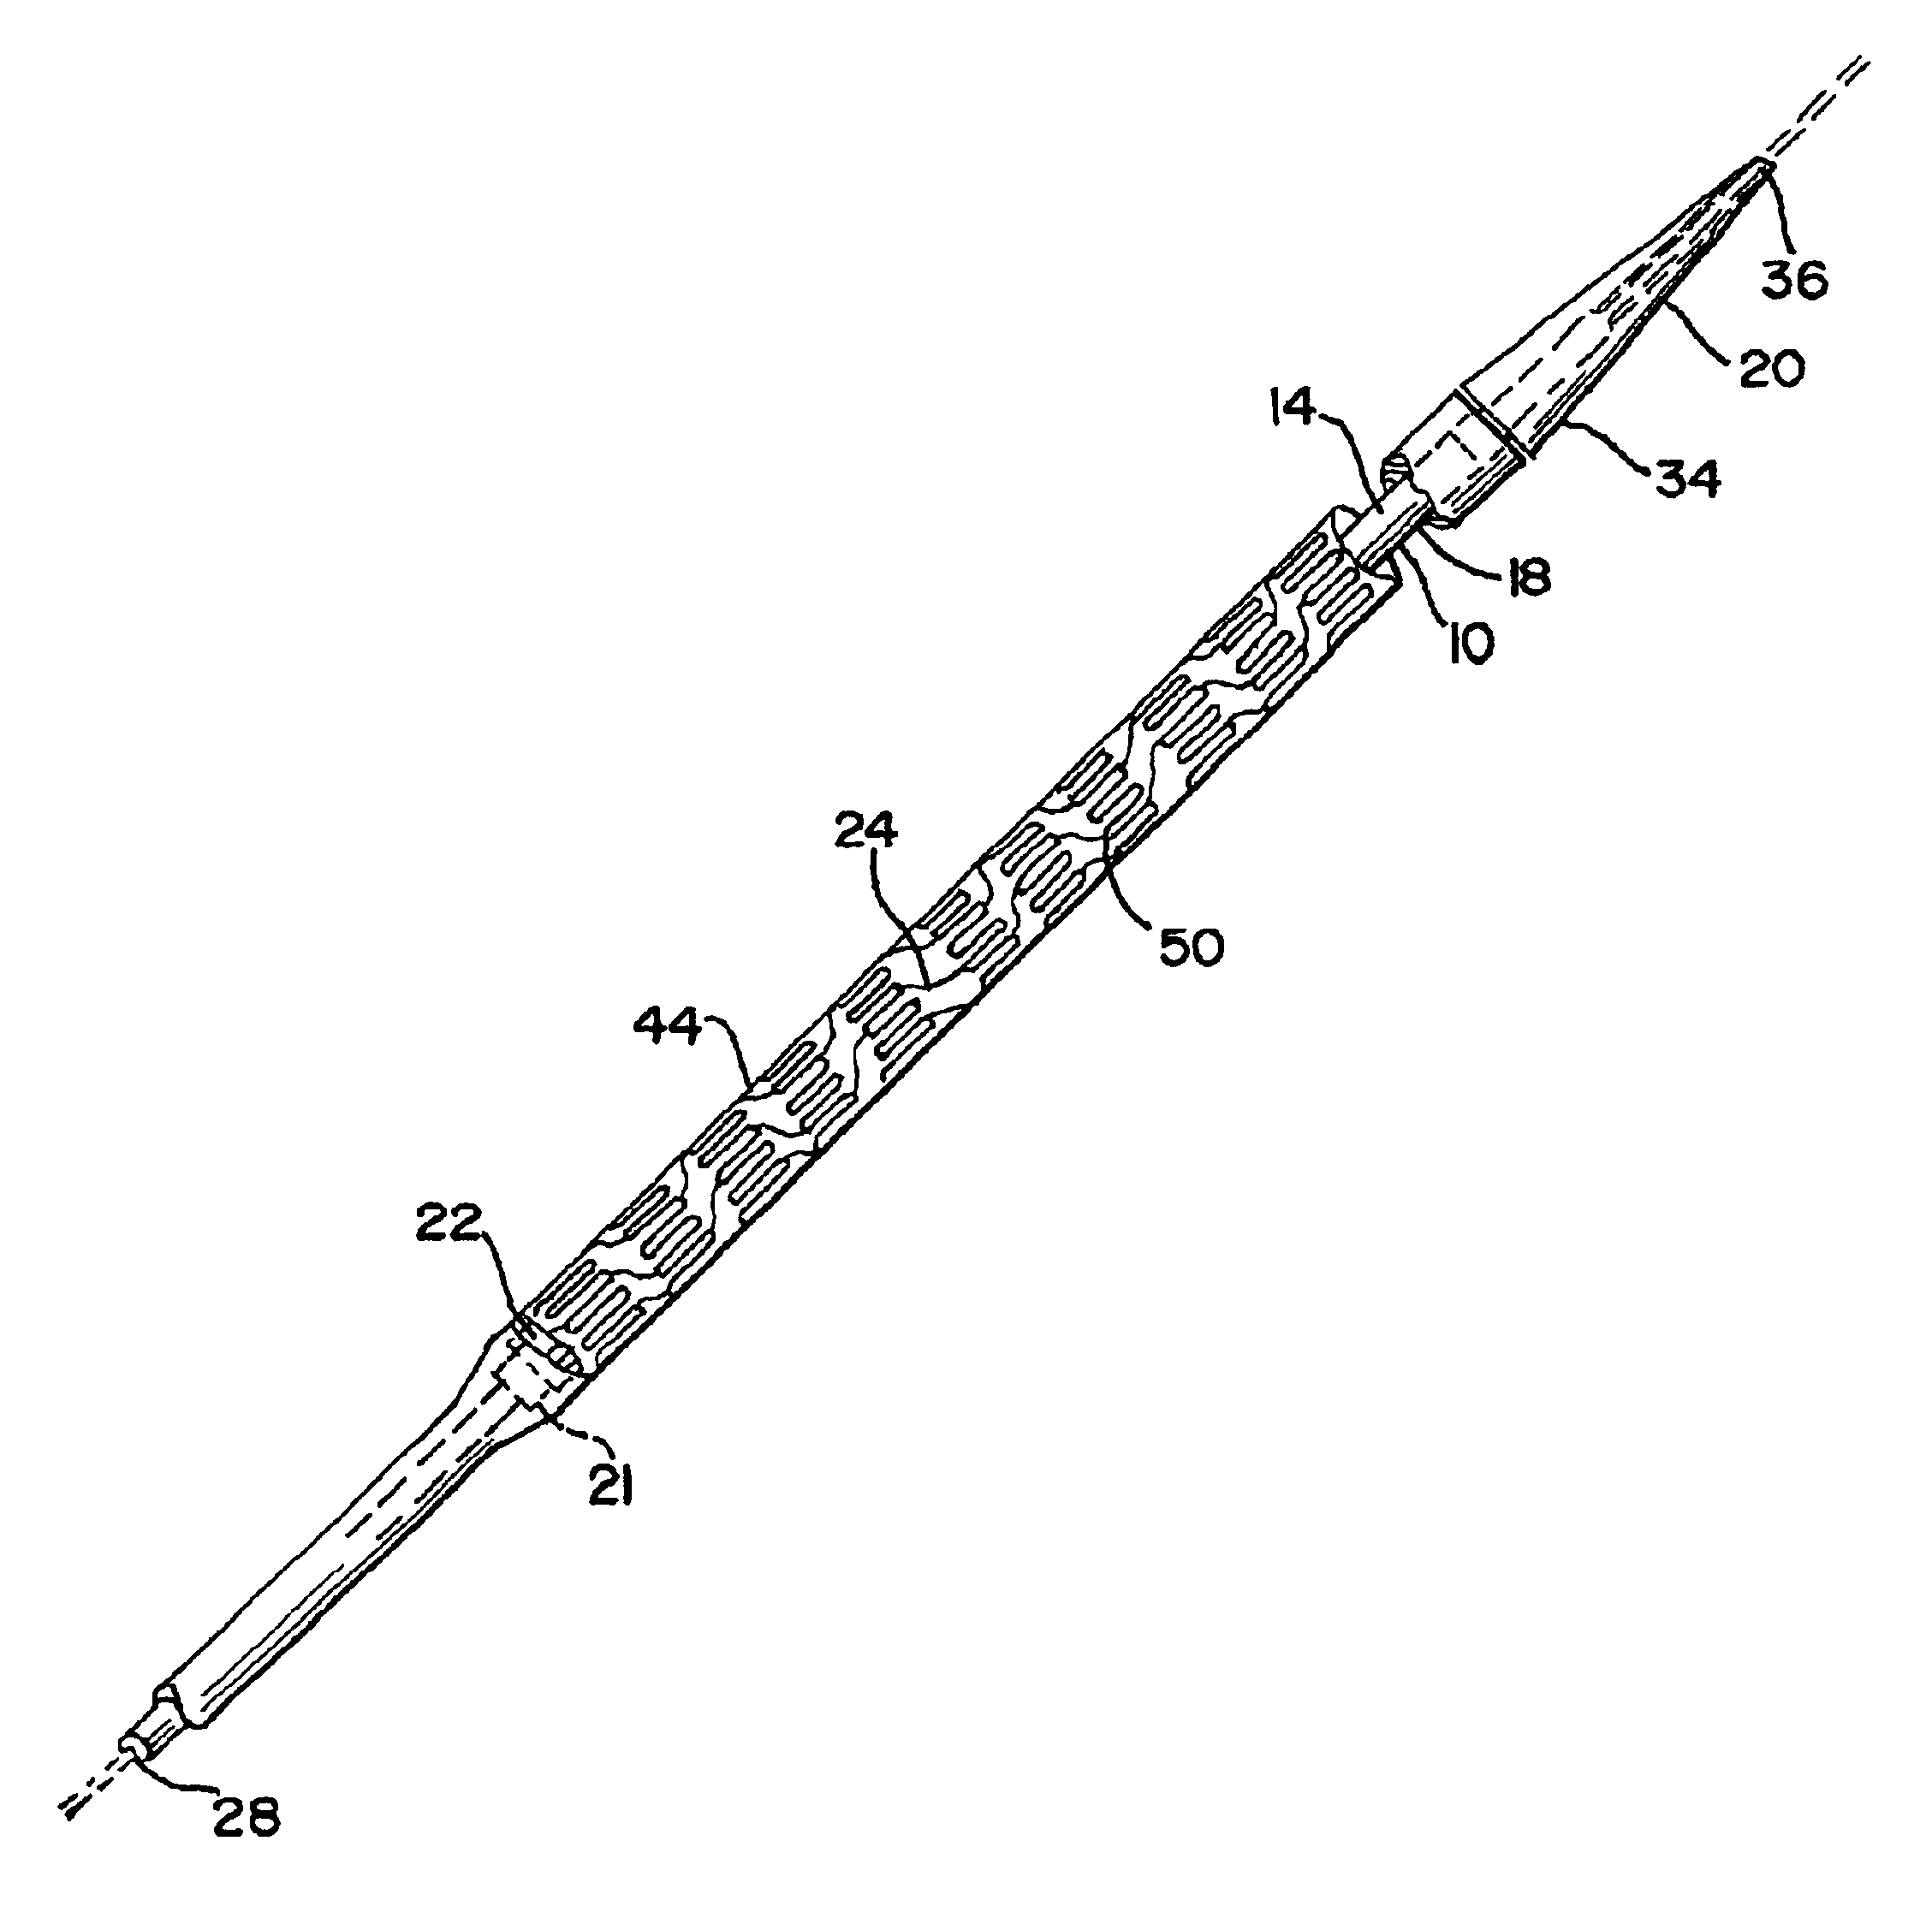 Stent delivery system having delivery catheter member with a clear transition zone